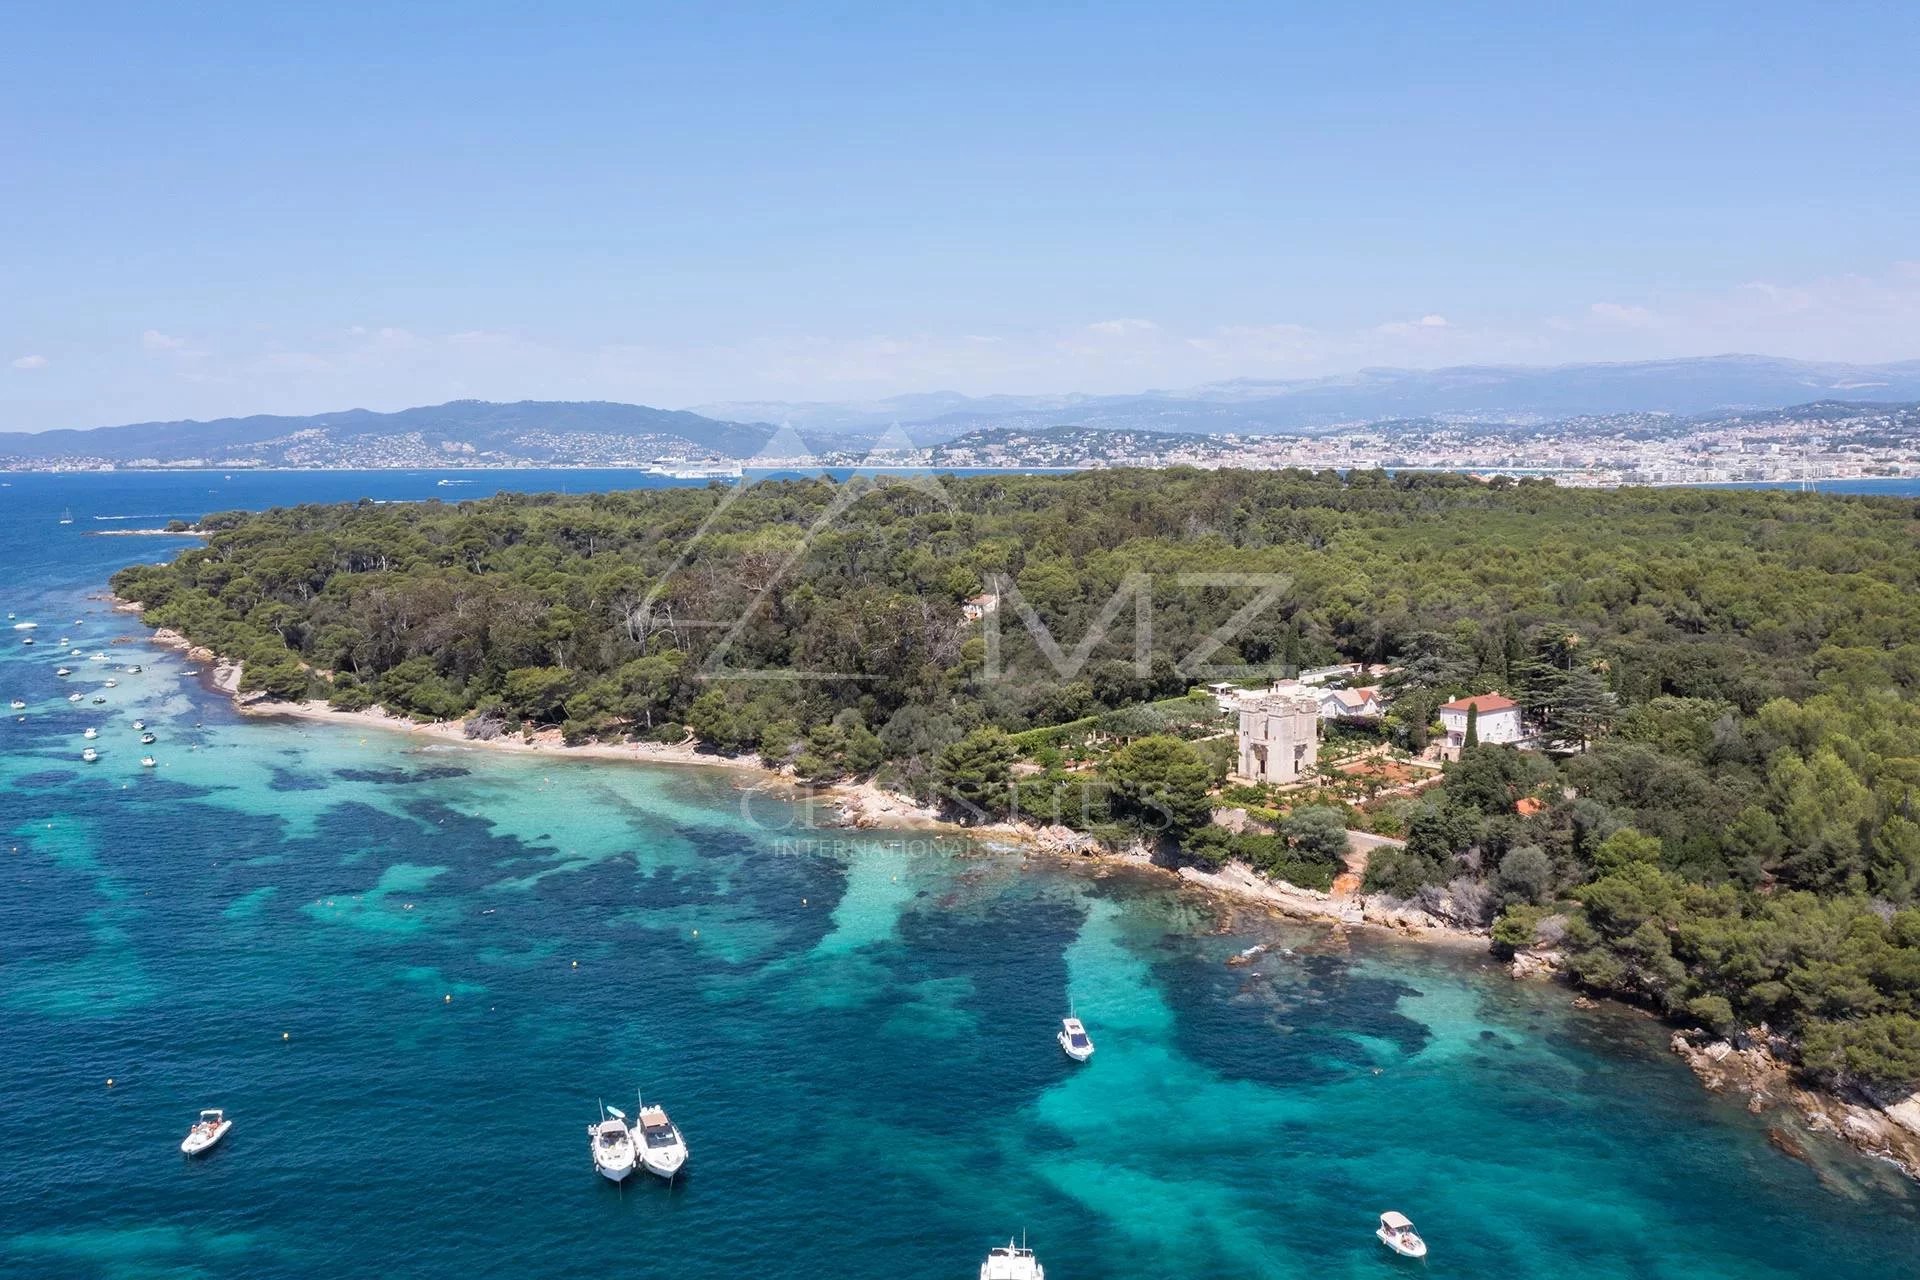 Cannes - Lérins Islands - Private domain